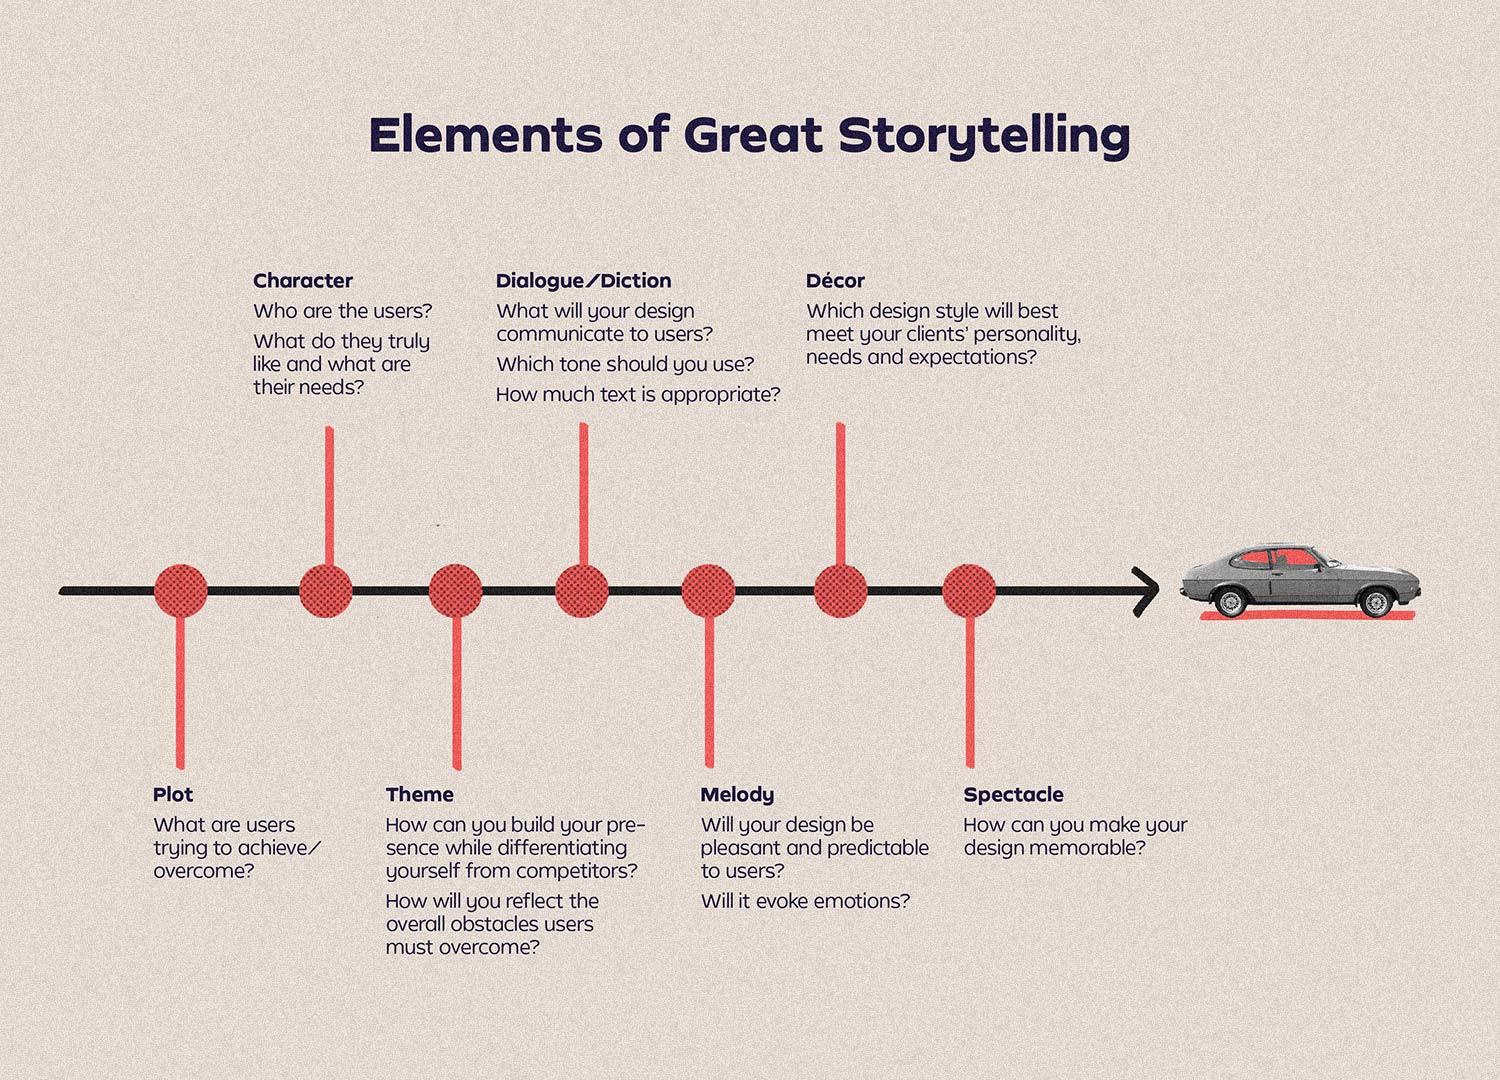 Elements of Great Storytelling